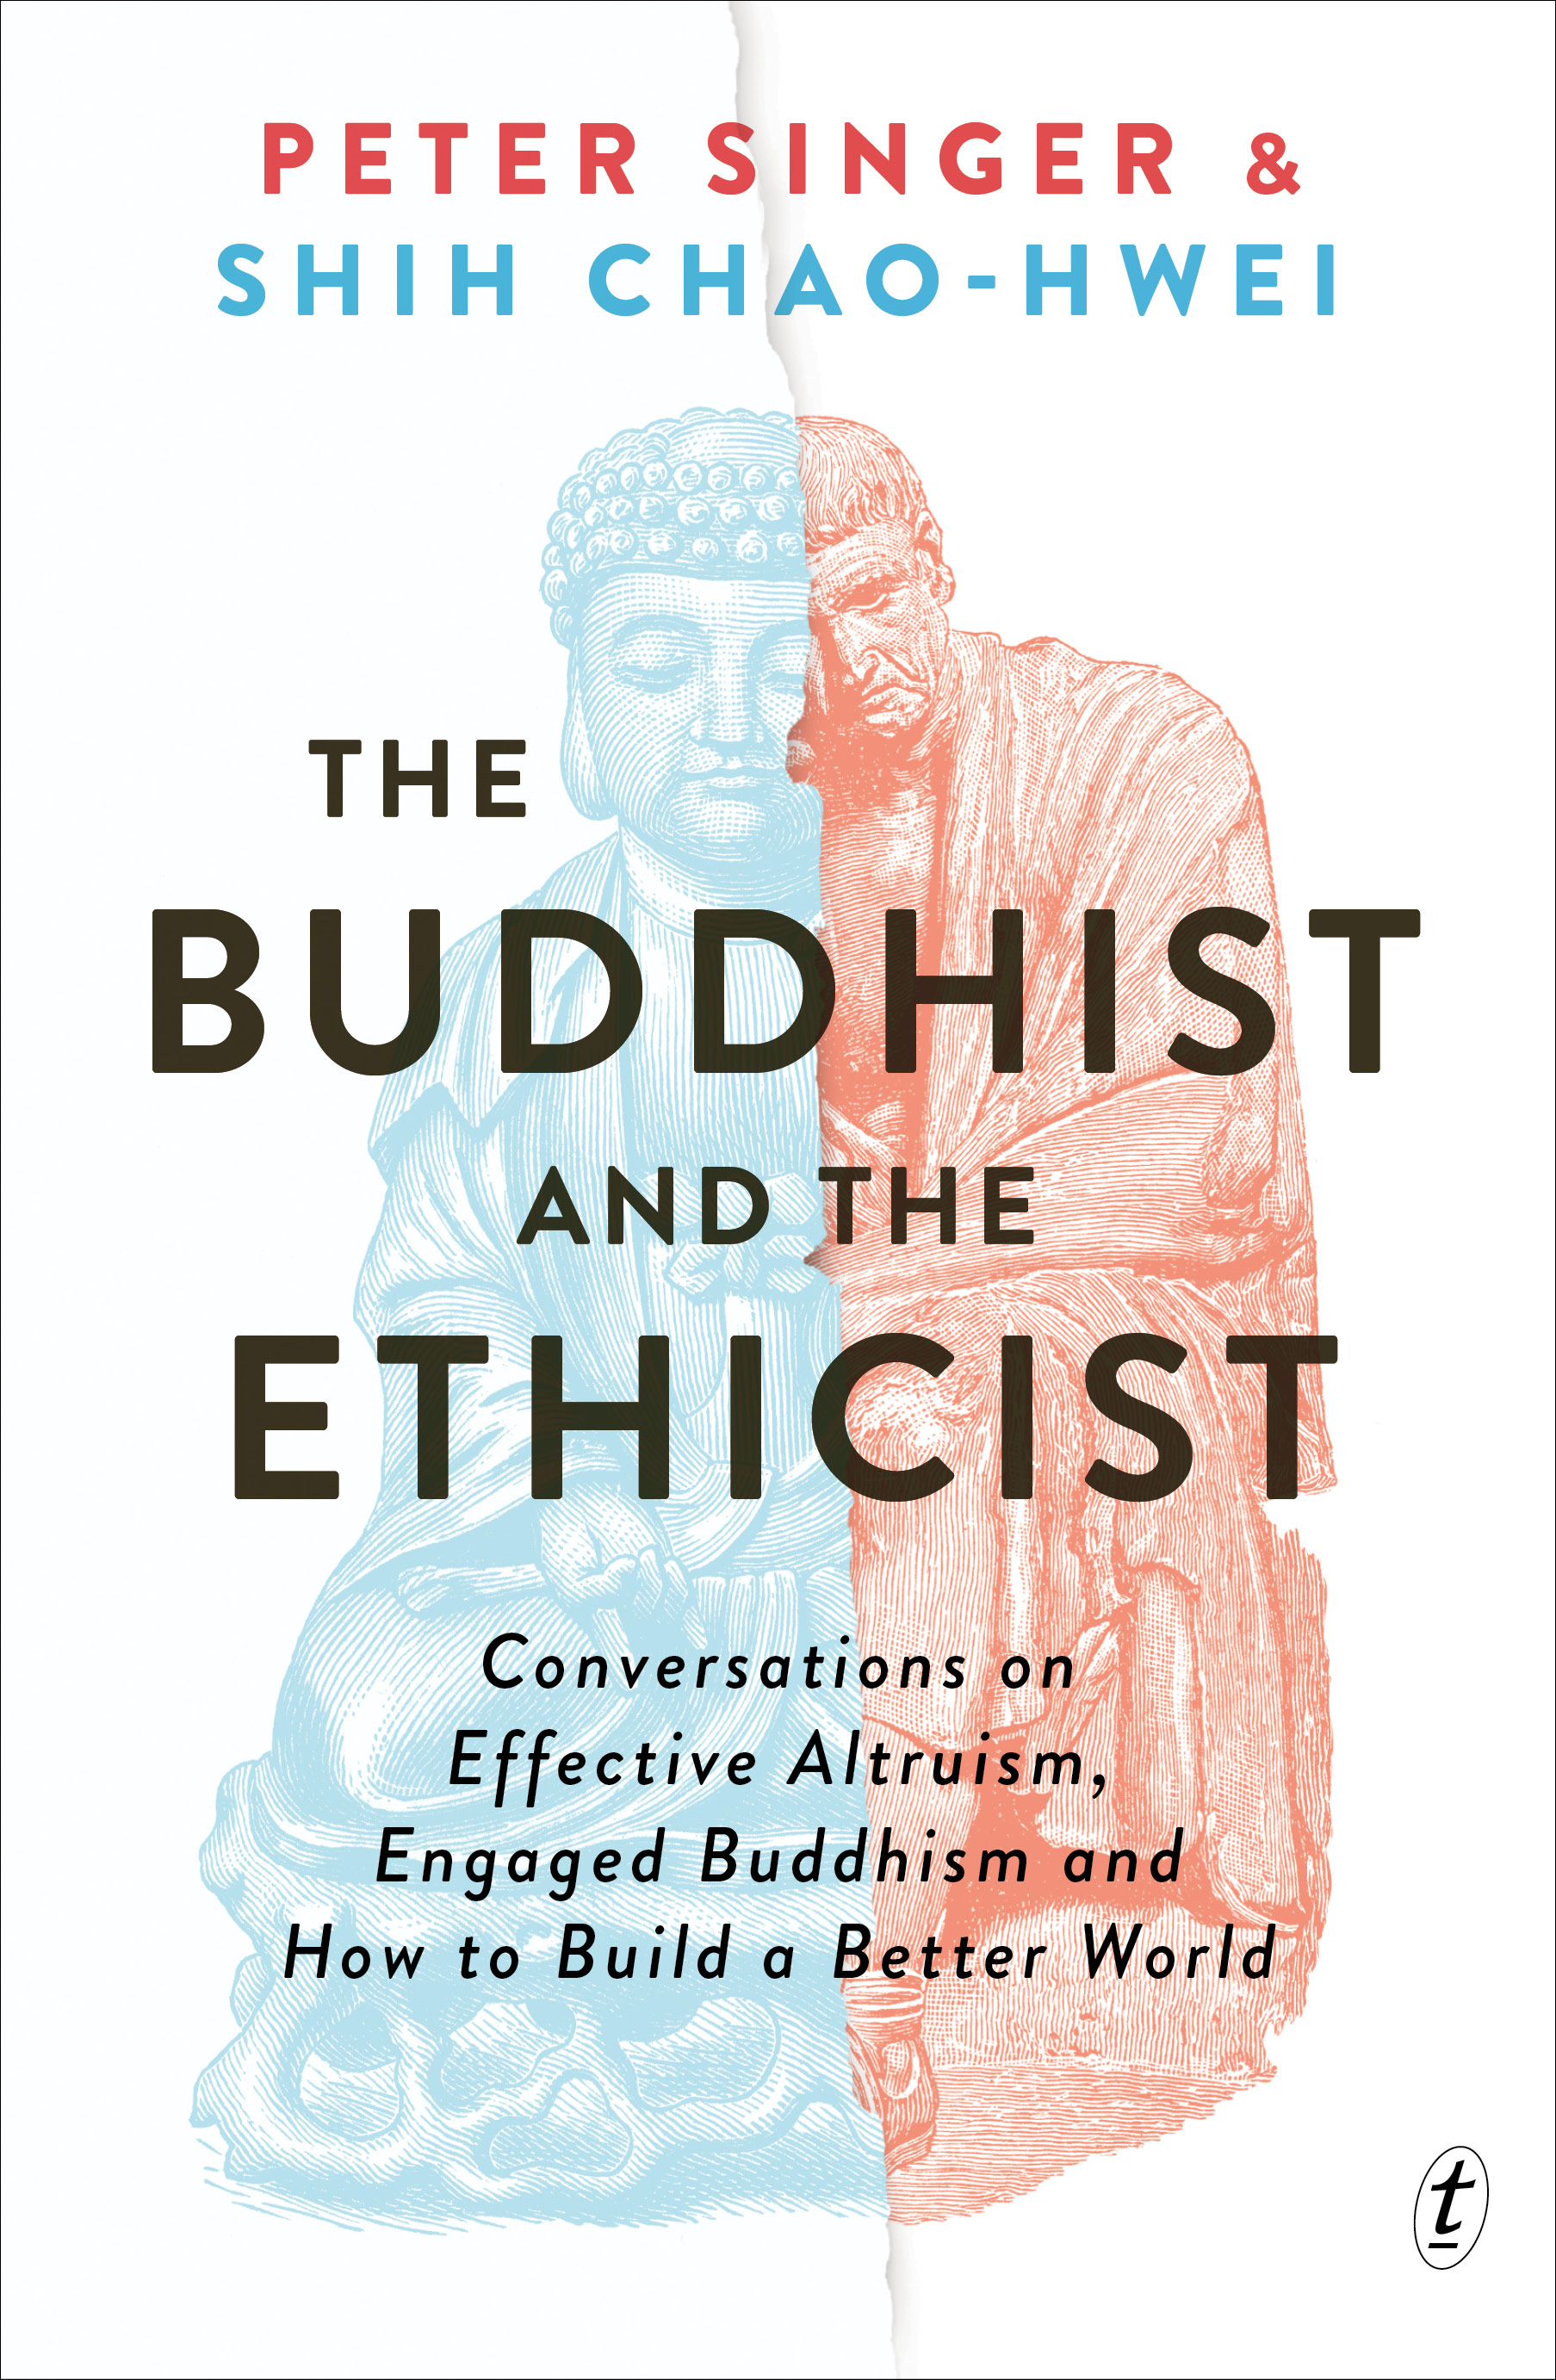 The Buddhist and the Ethicist: Conversations on effective altruism, engaged Buddhism, and how to build a better world